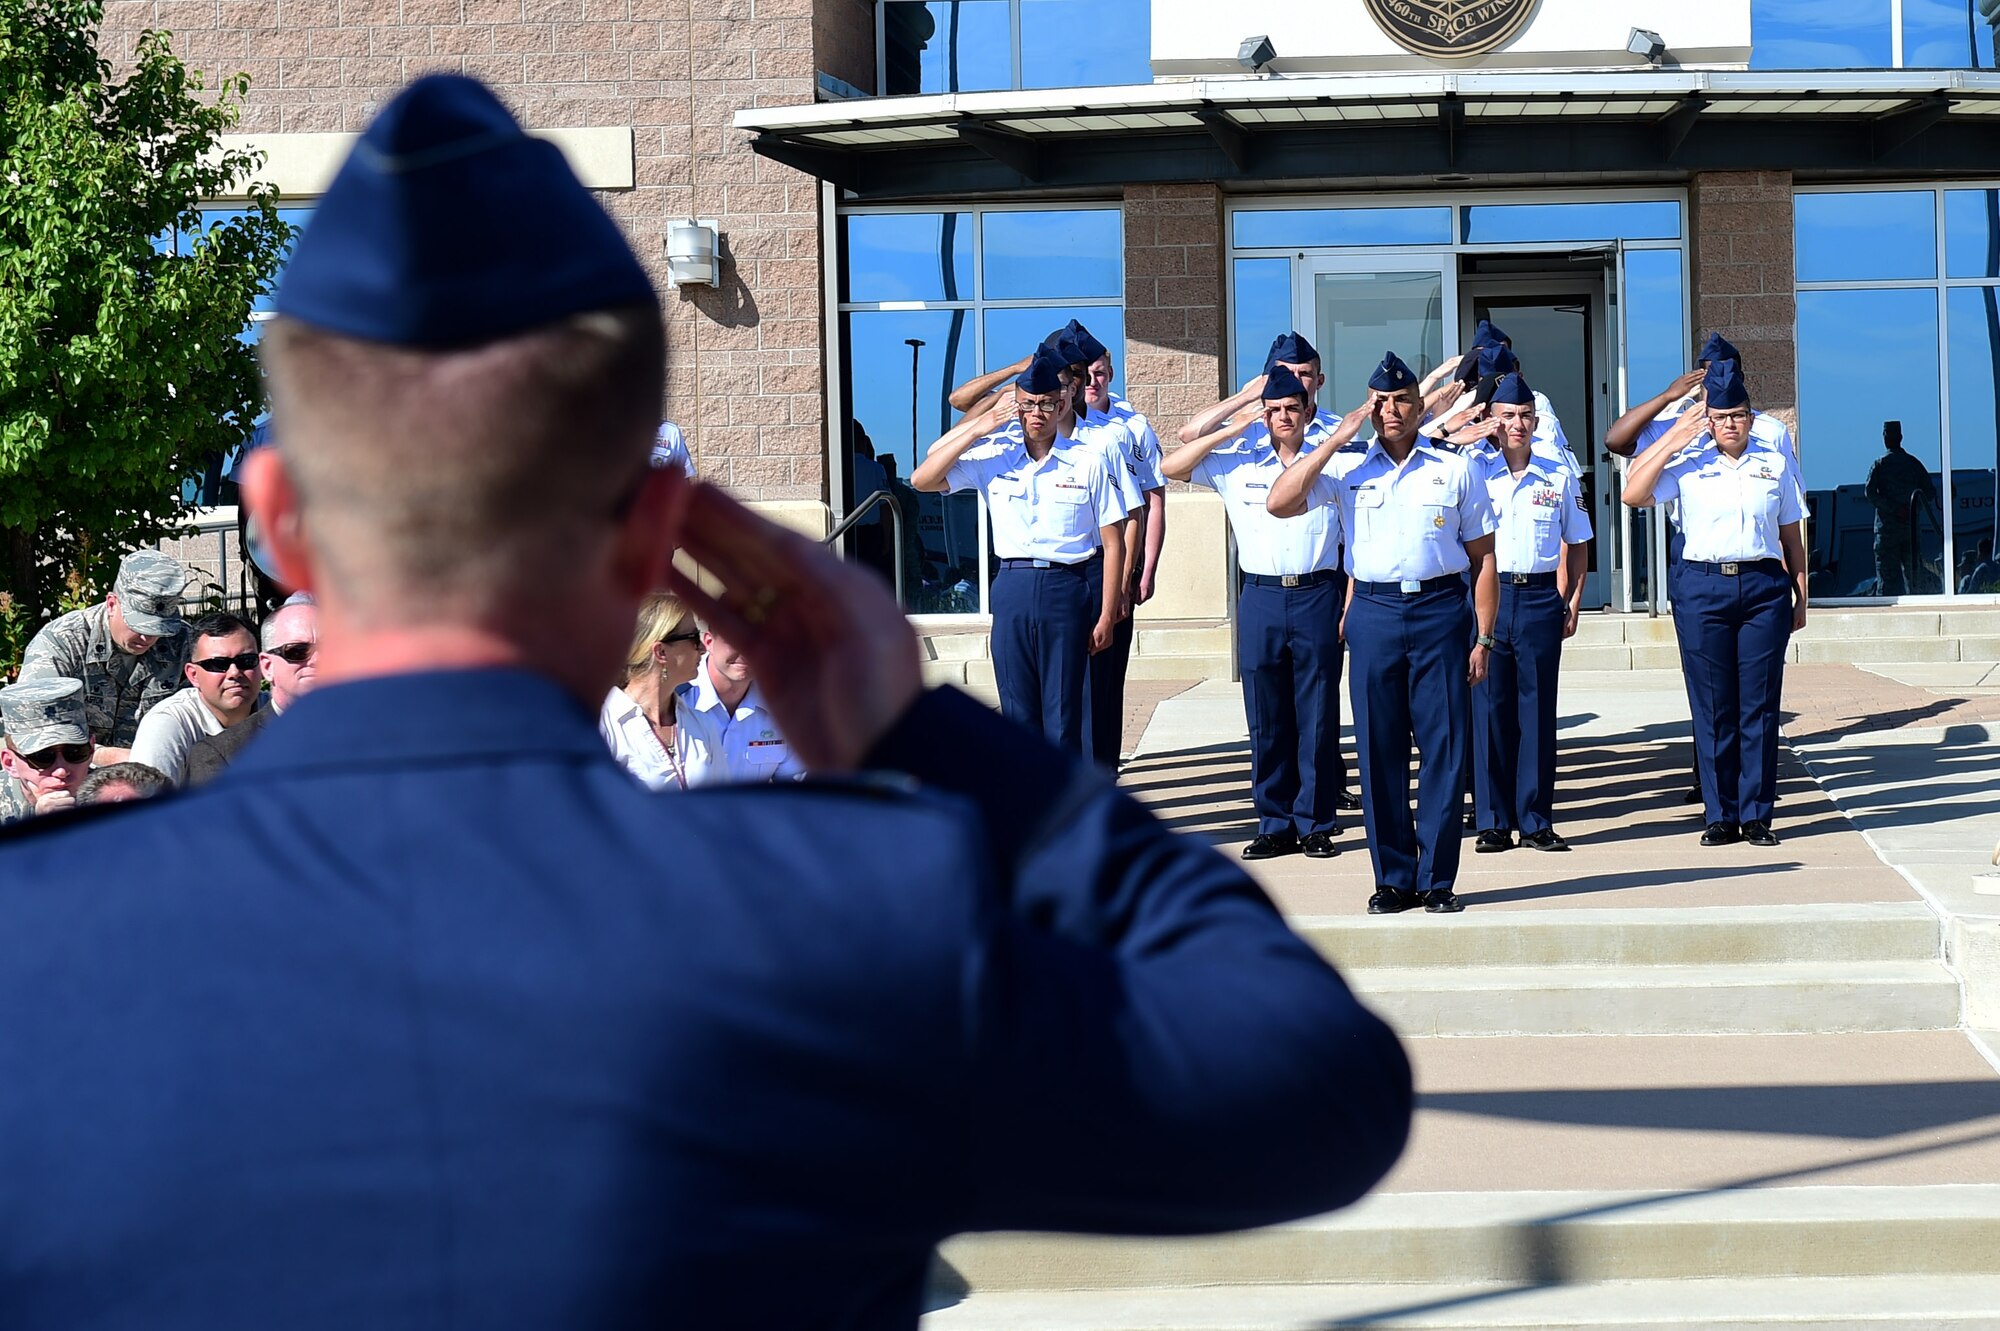 Col. Shawn Thompson, 460th Mission Support Group commander, receives his first salute from MSG members August 1, 2016, during a change of command on Buckley Air Force Base, Colo. A change of command ceremony represents the formal transfer of responsibility from an outgoing commander to their successor. (U.S. Air Force photo by Airman 1st Class Gabrielle Spradling/Released)